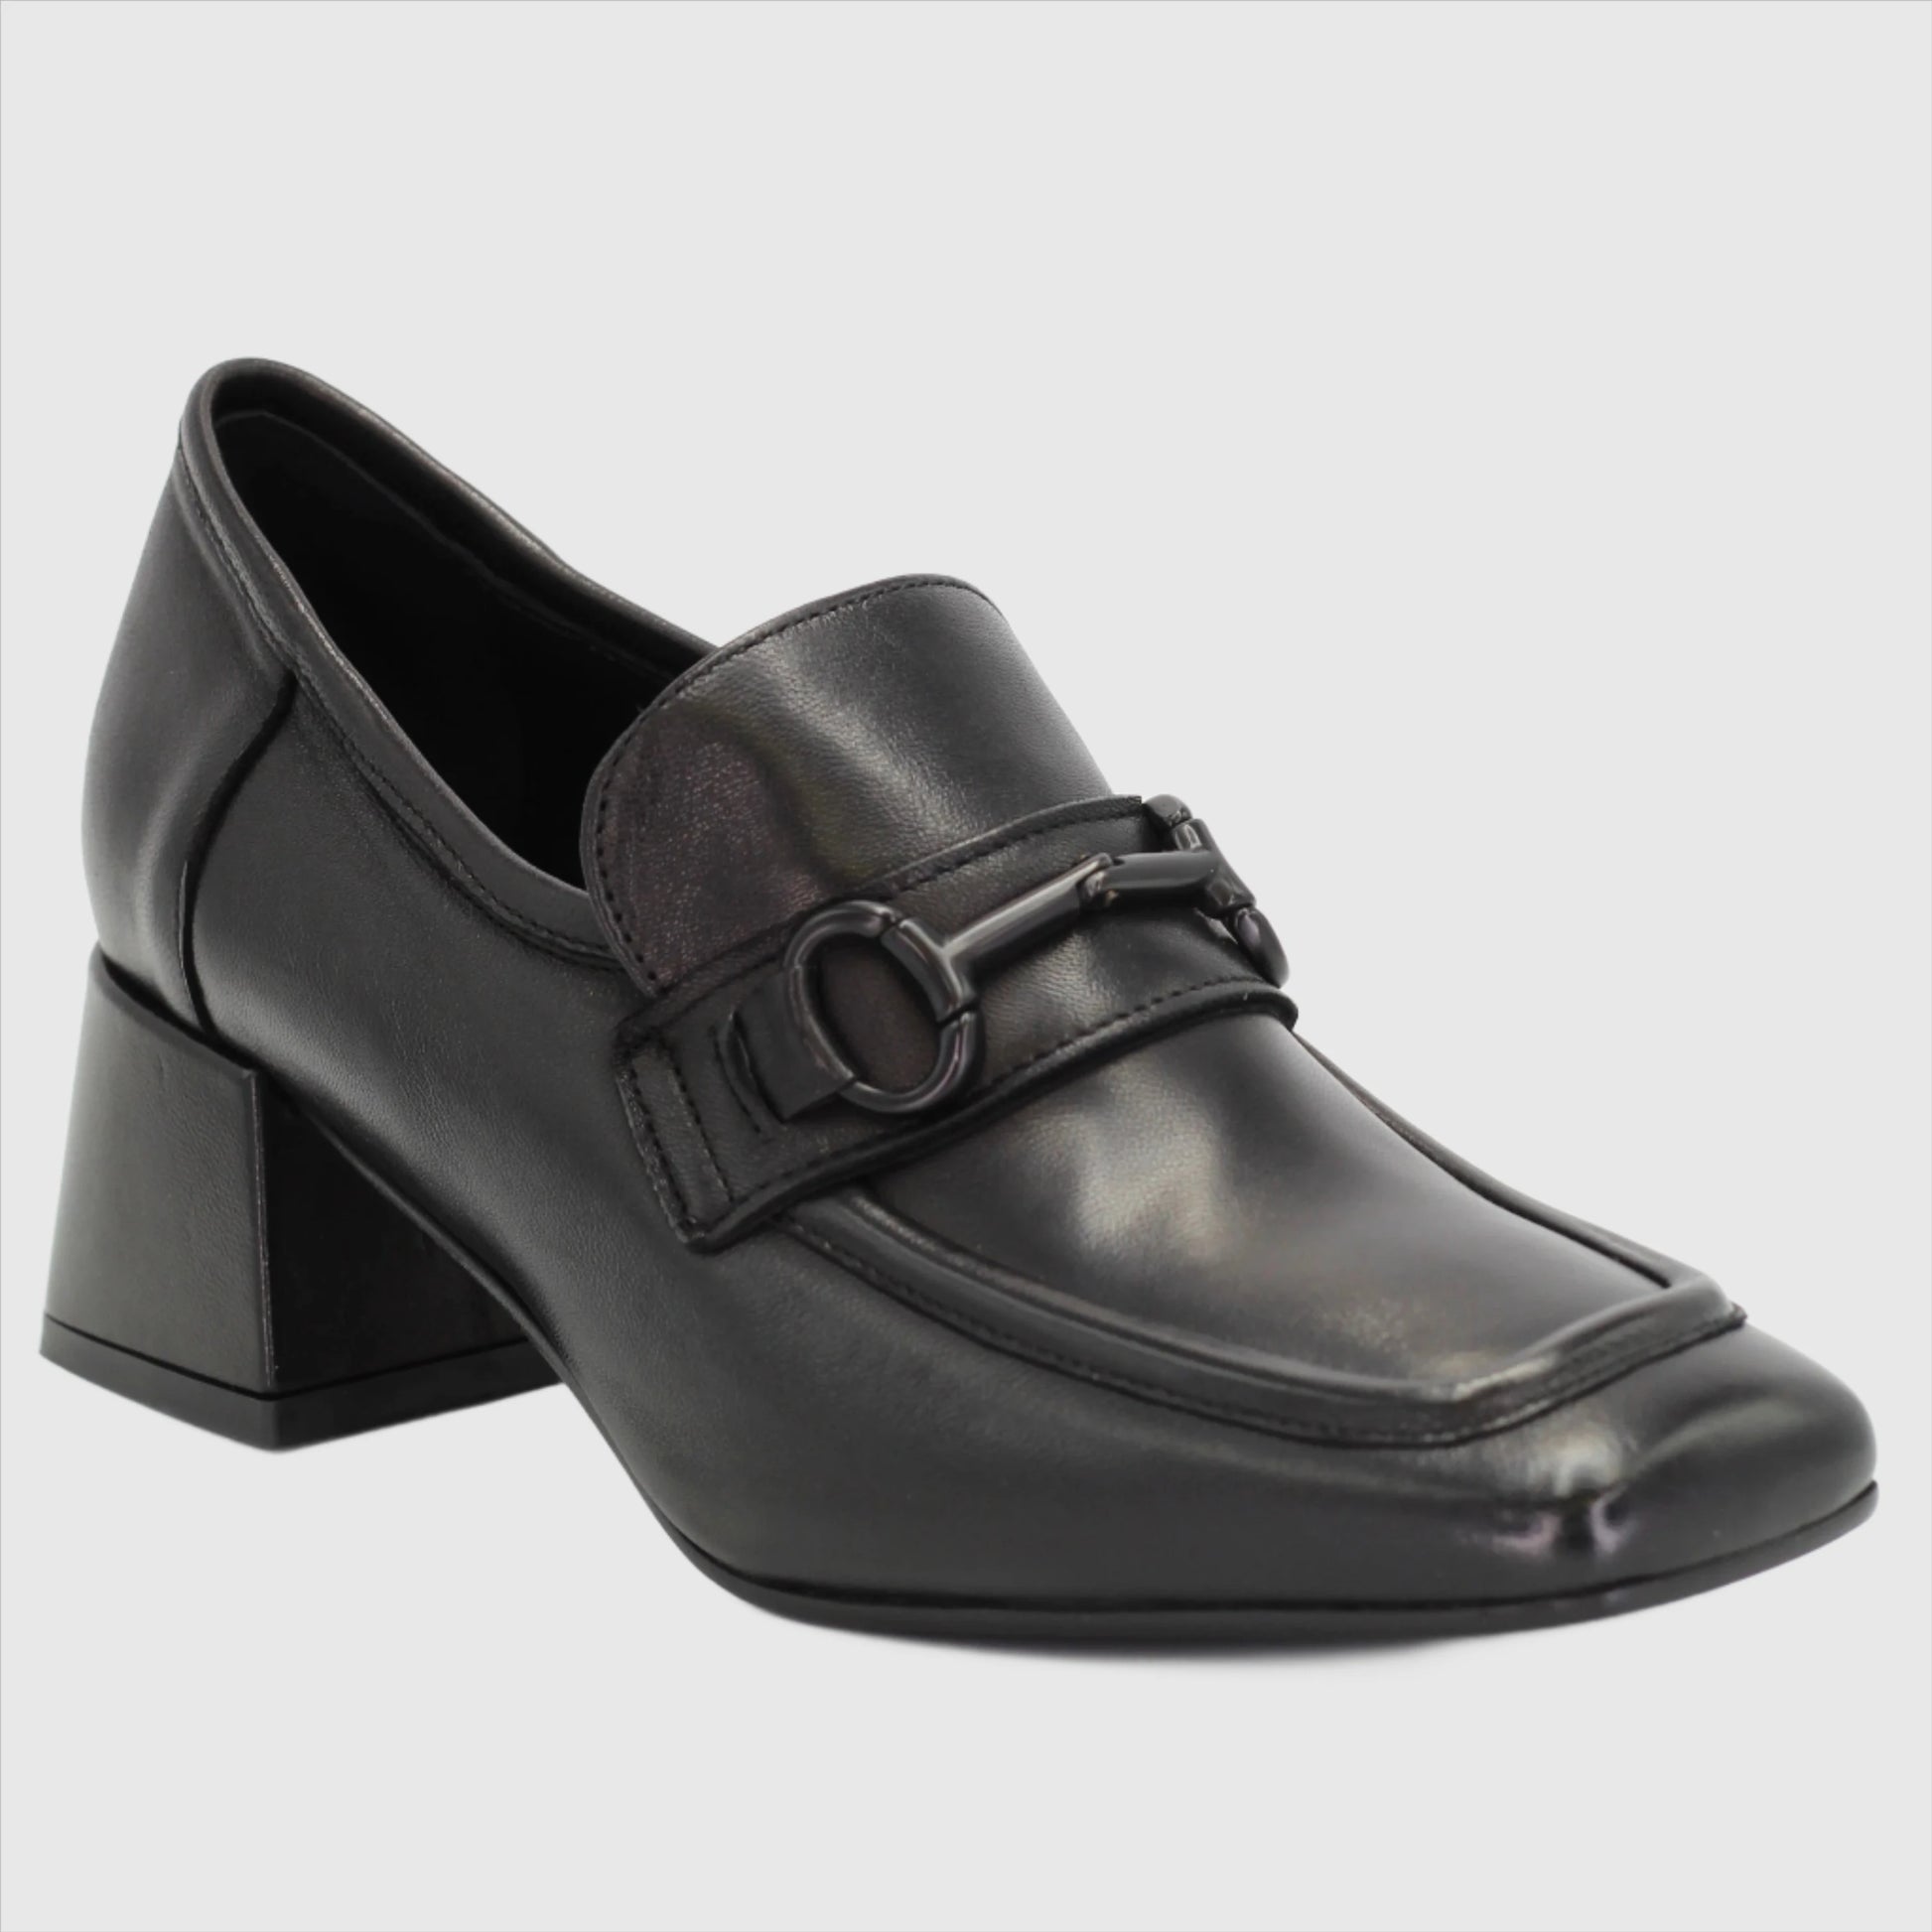 Shop Handmade Italian Leather block heel in black (NADIA6) or browse our range of hand-made Italian shoes in leather or suede in-store at Aliverti Cape Town, or shop online. We deliver in South Africa & offer multiple payment plans as well as accept multiple safe & secure payment methods.